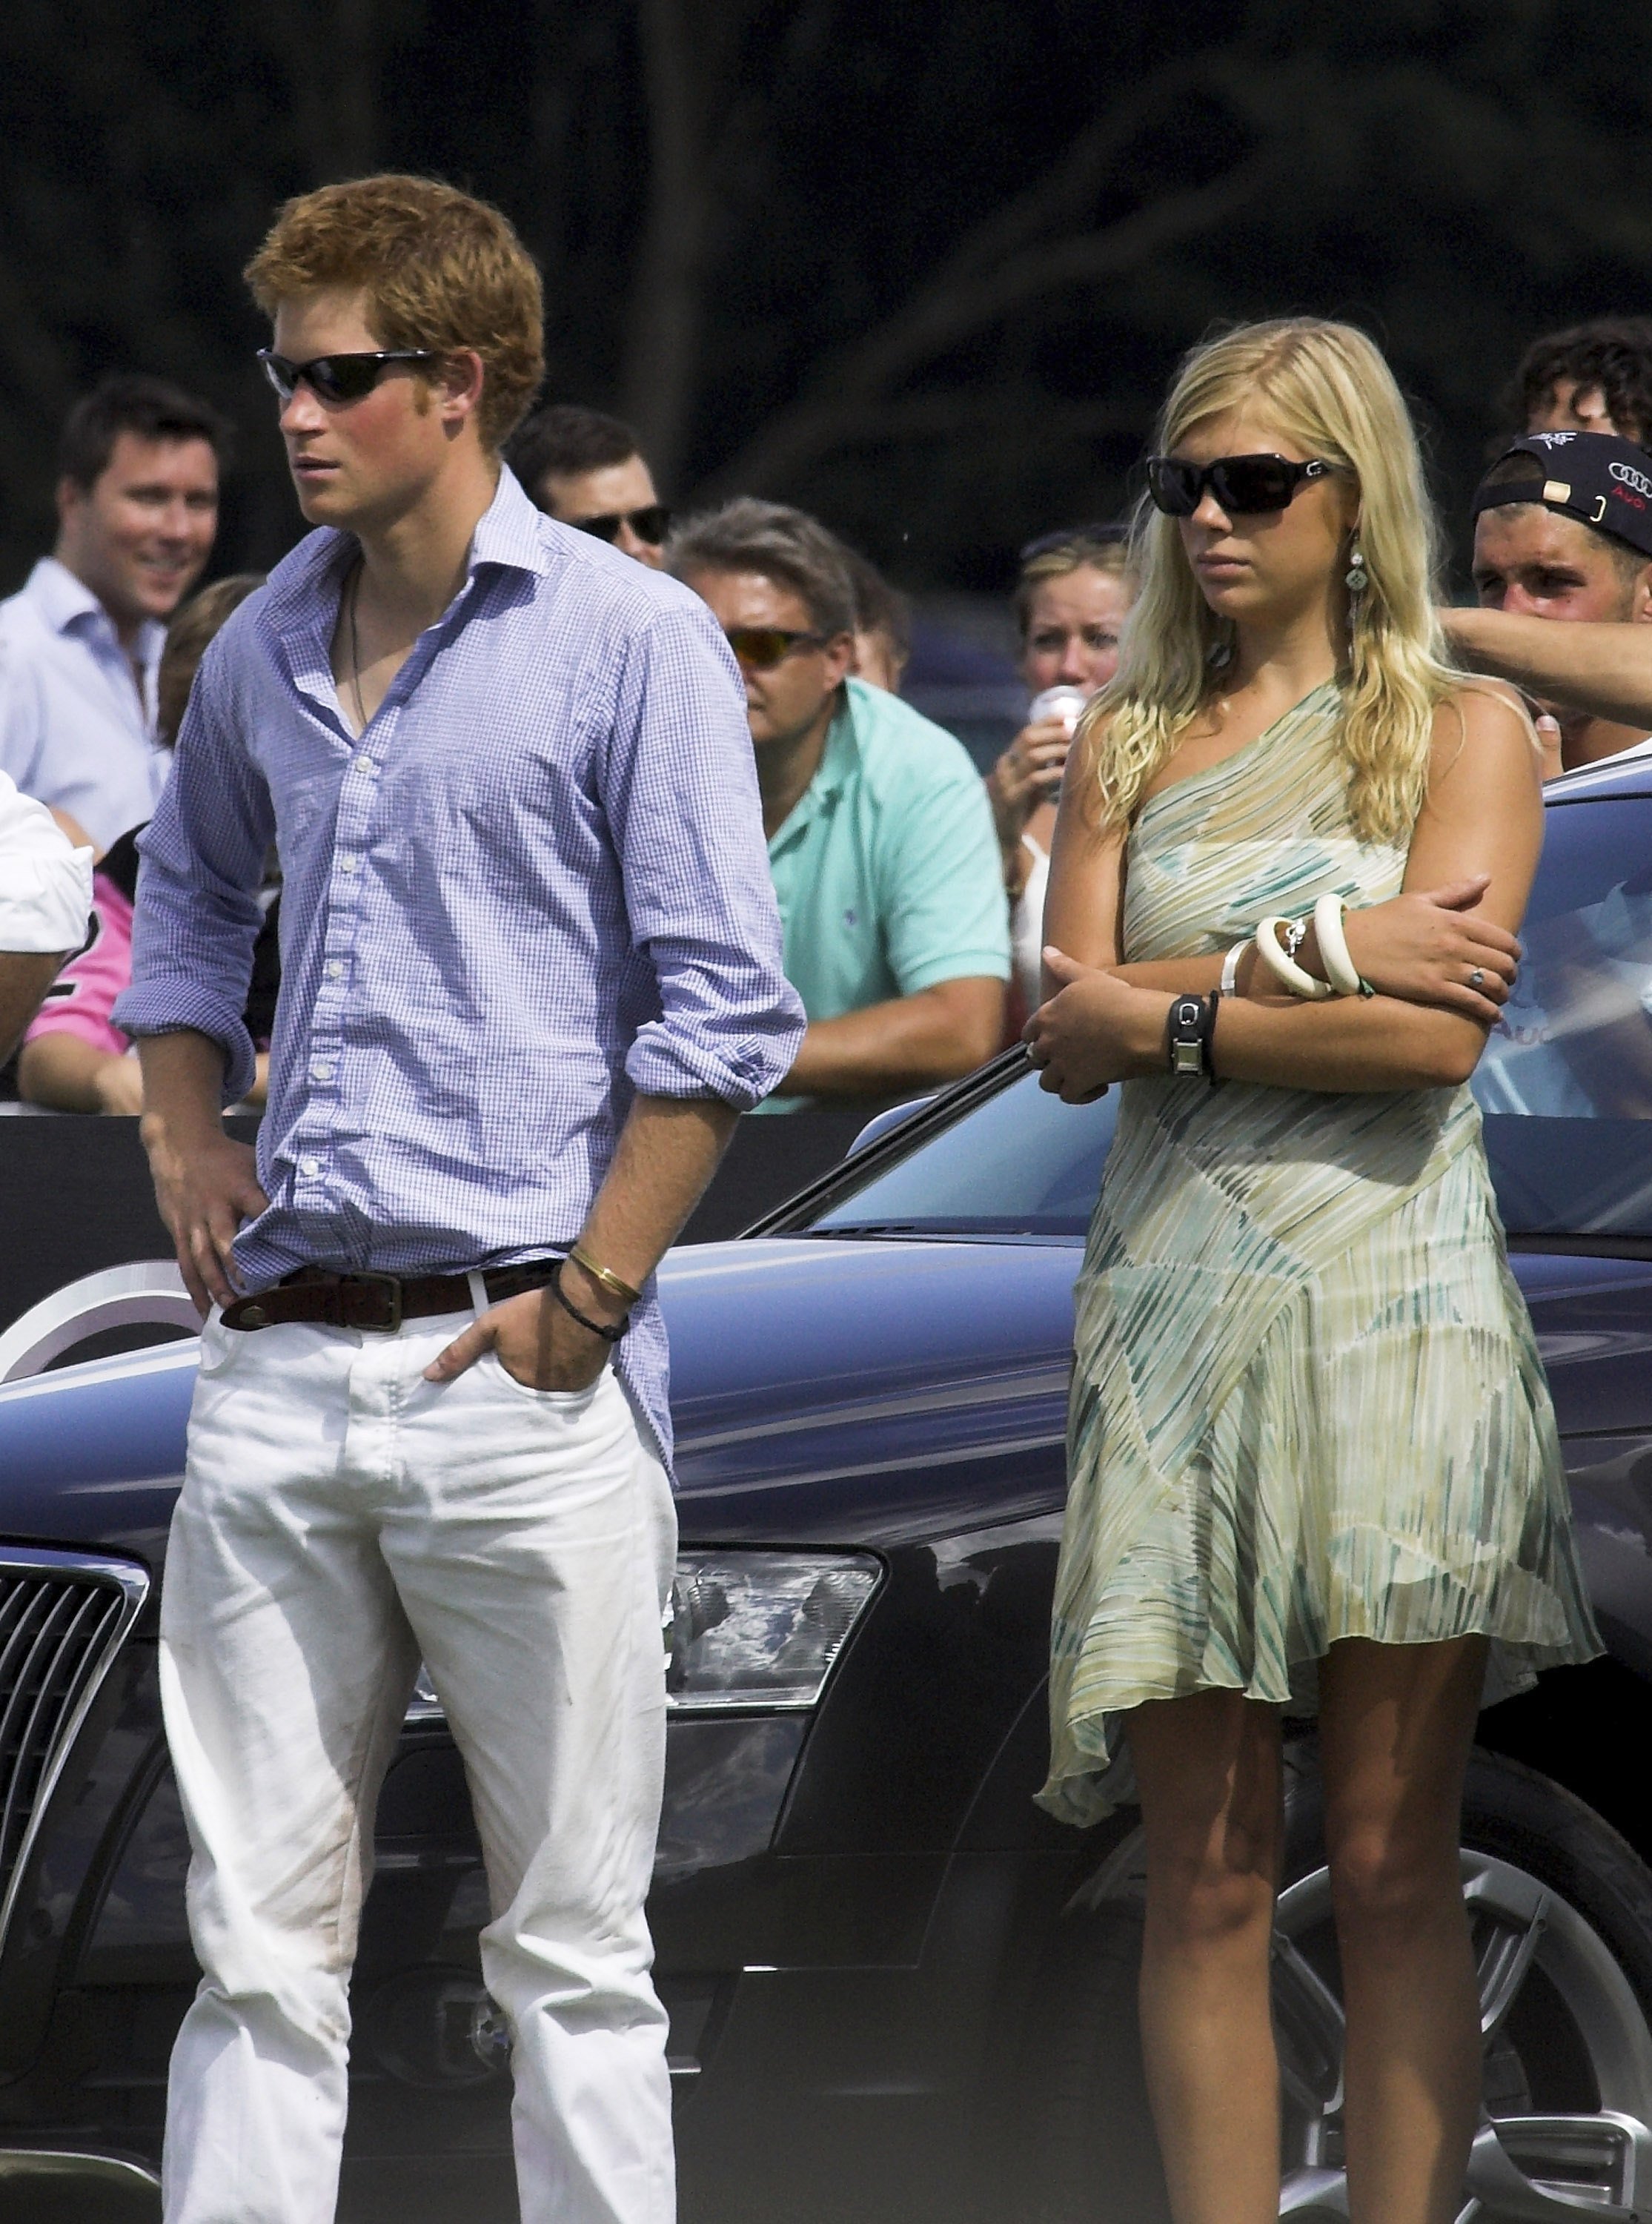 Prince Harry S Marriage Material Ex Chelsy Davy Felt The Focus On Their Relationship Was Scary